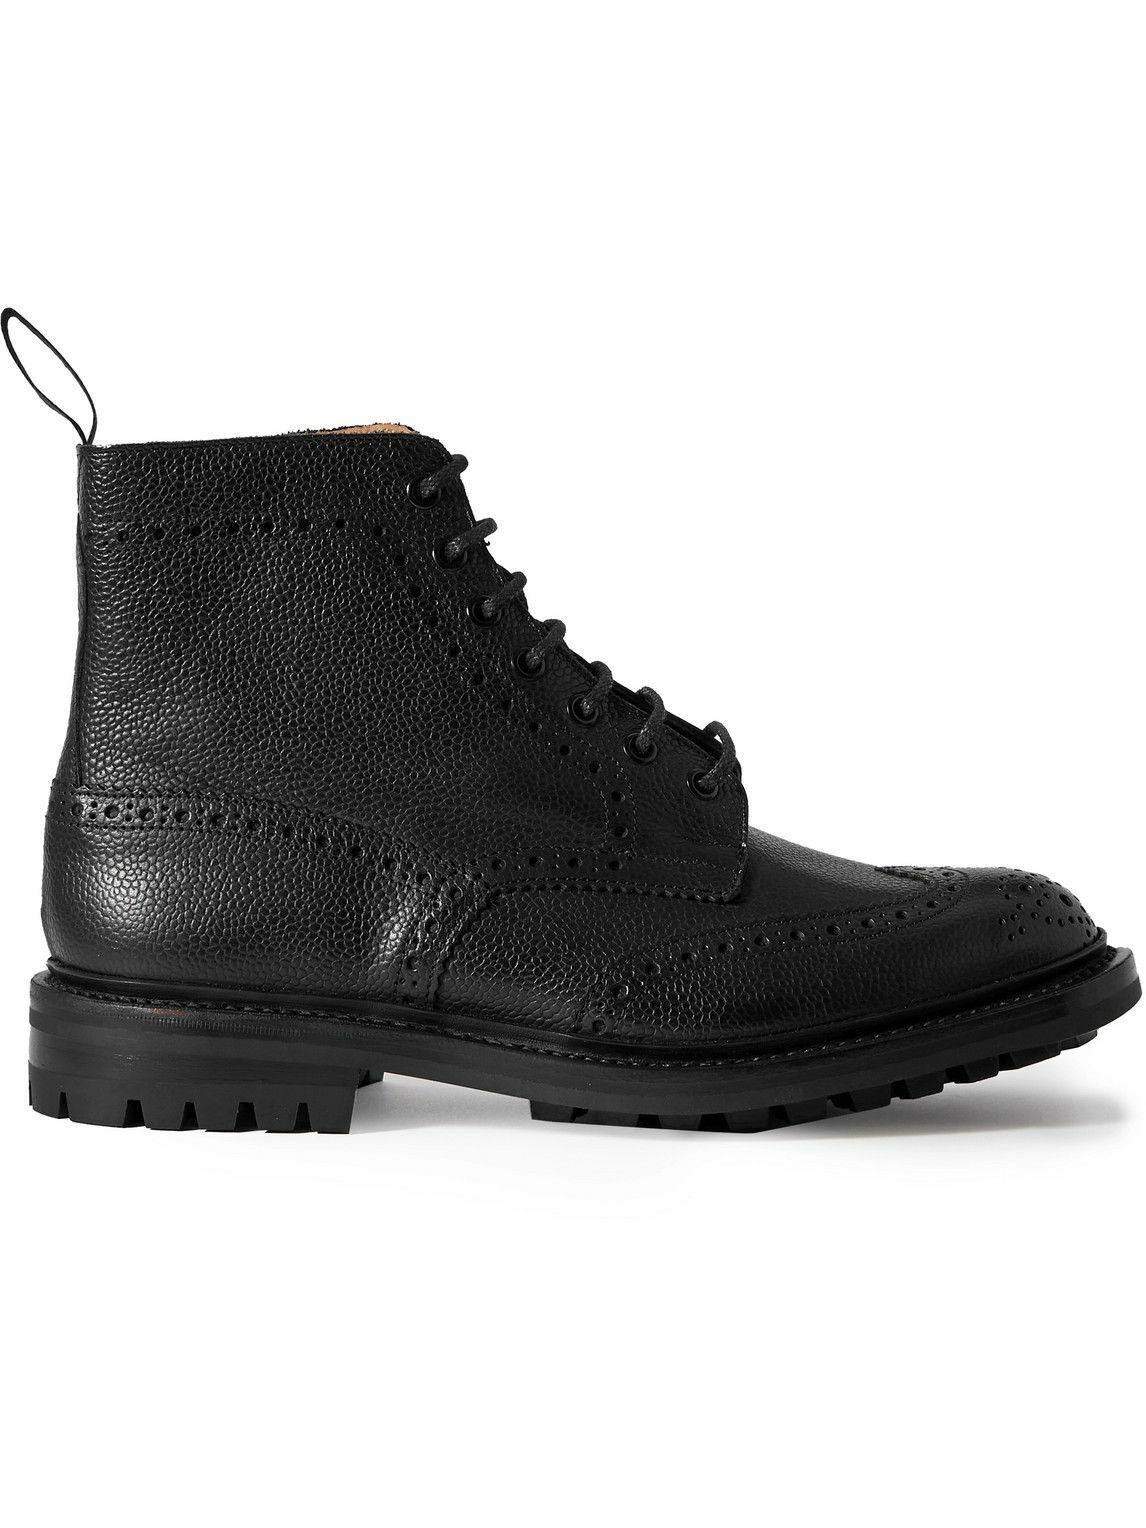 Photo: Tricker's - Stow Leather Brogue Boots - Black